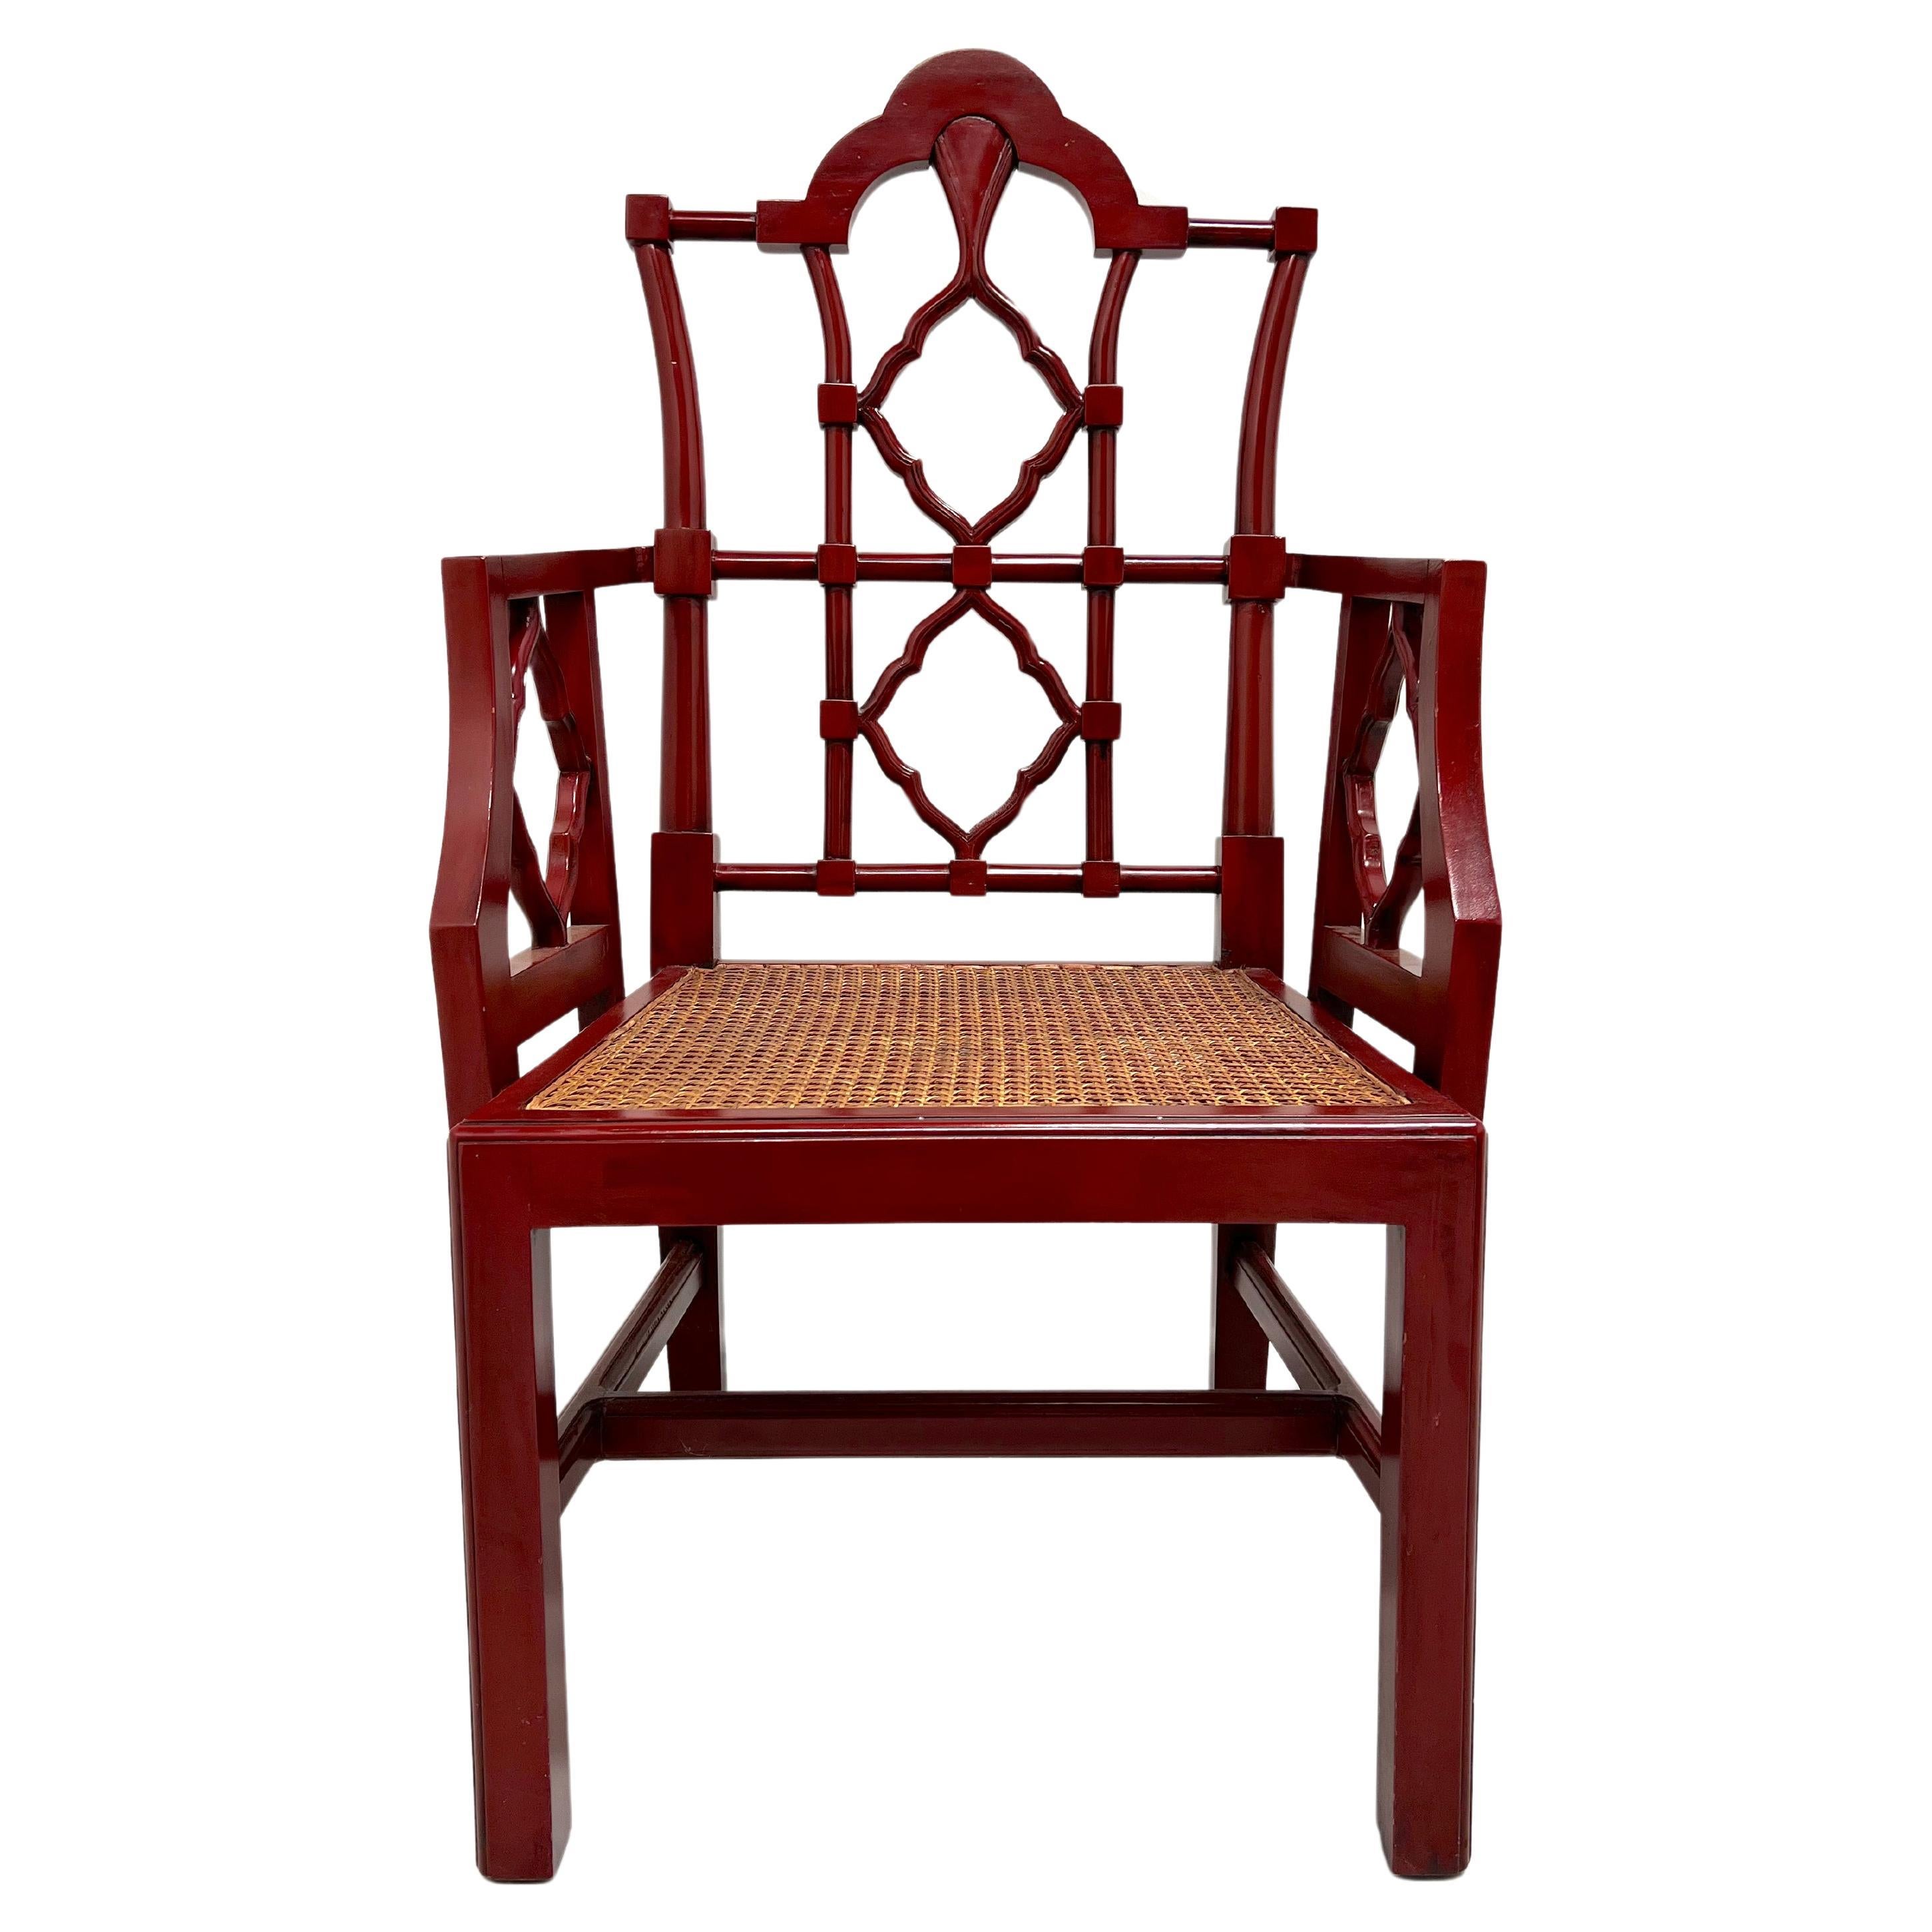 Late 20th Century Red Lacquered Carved Wood & Cane Asian Style Armchair For Sale